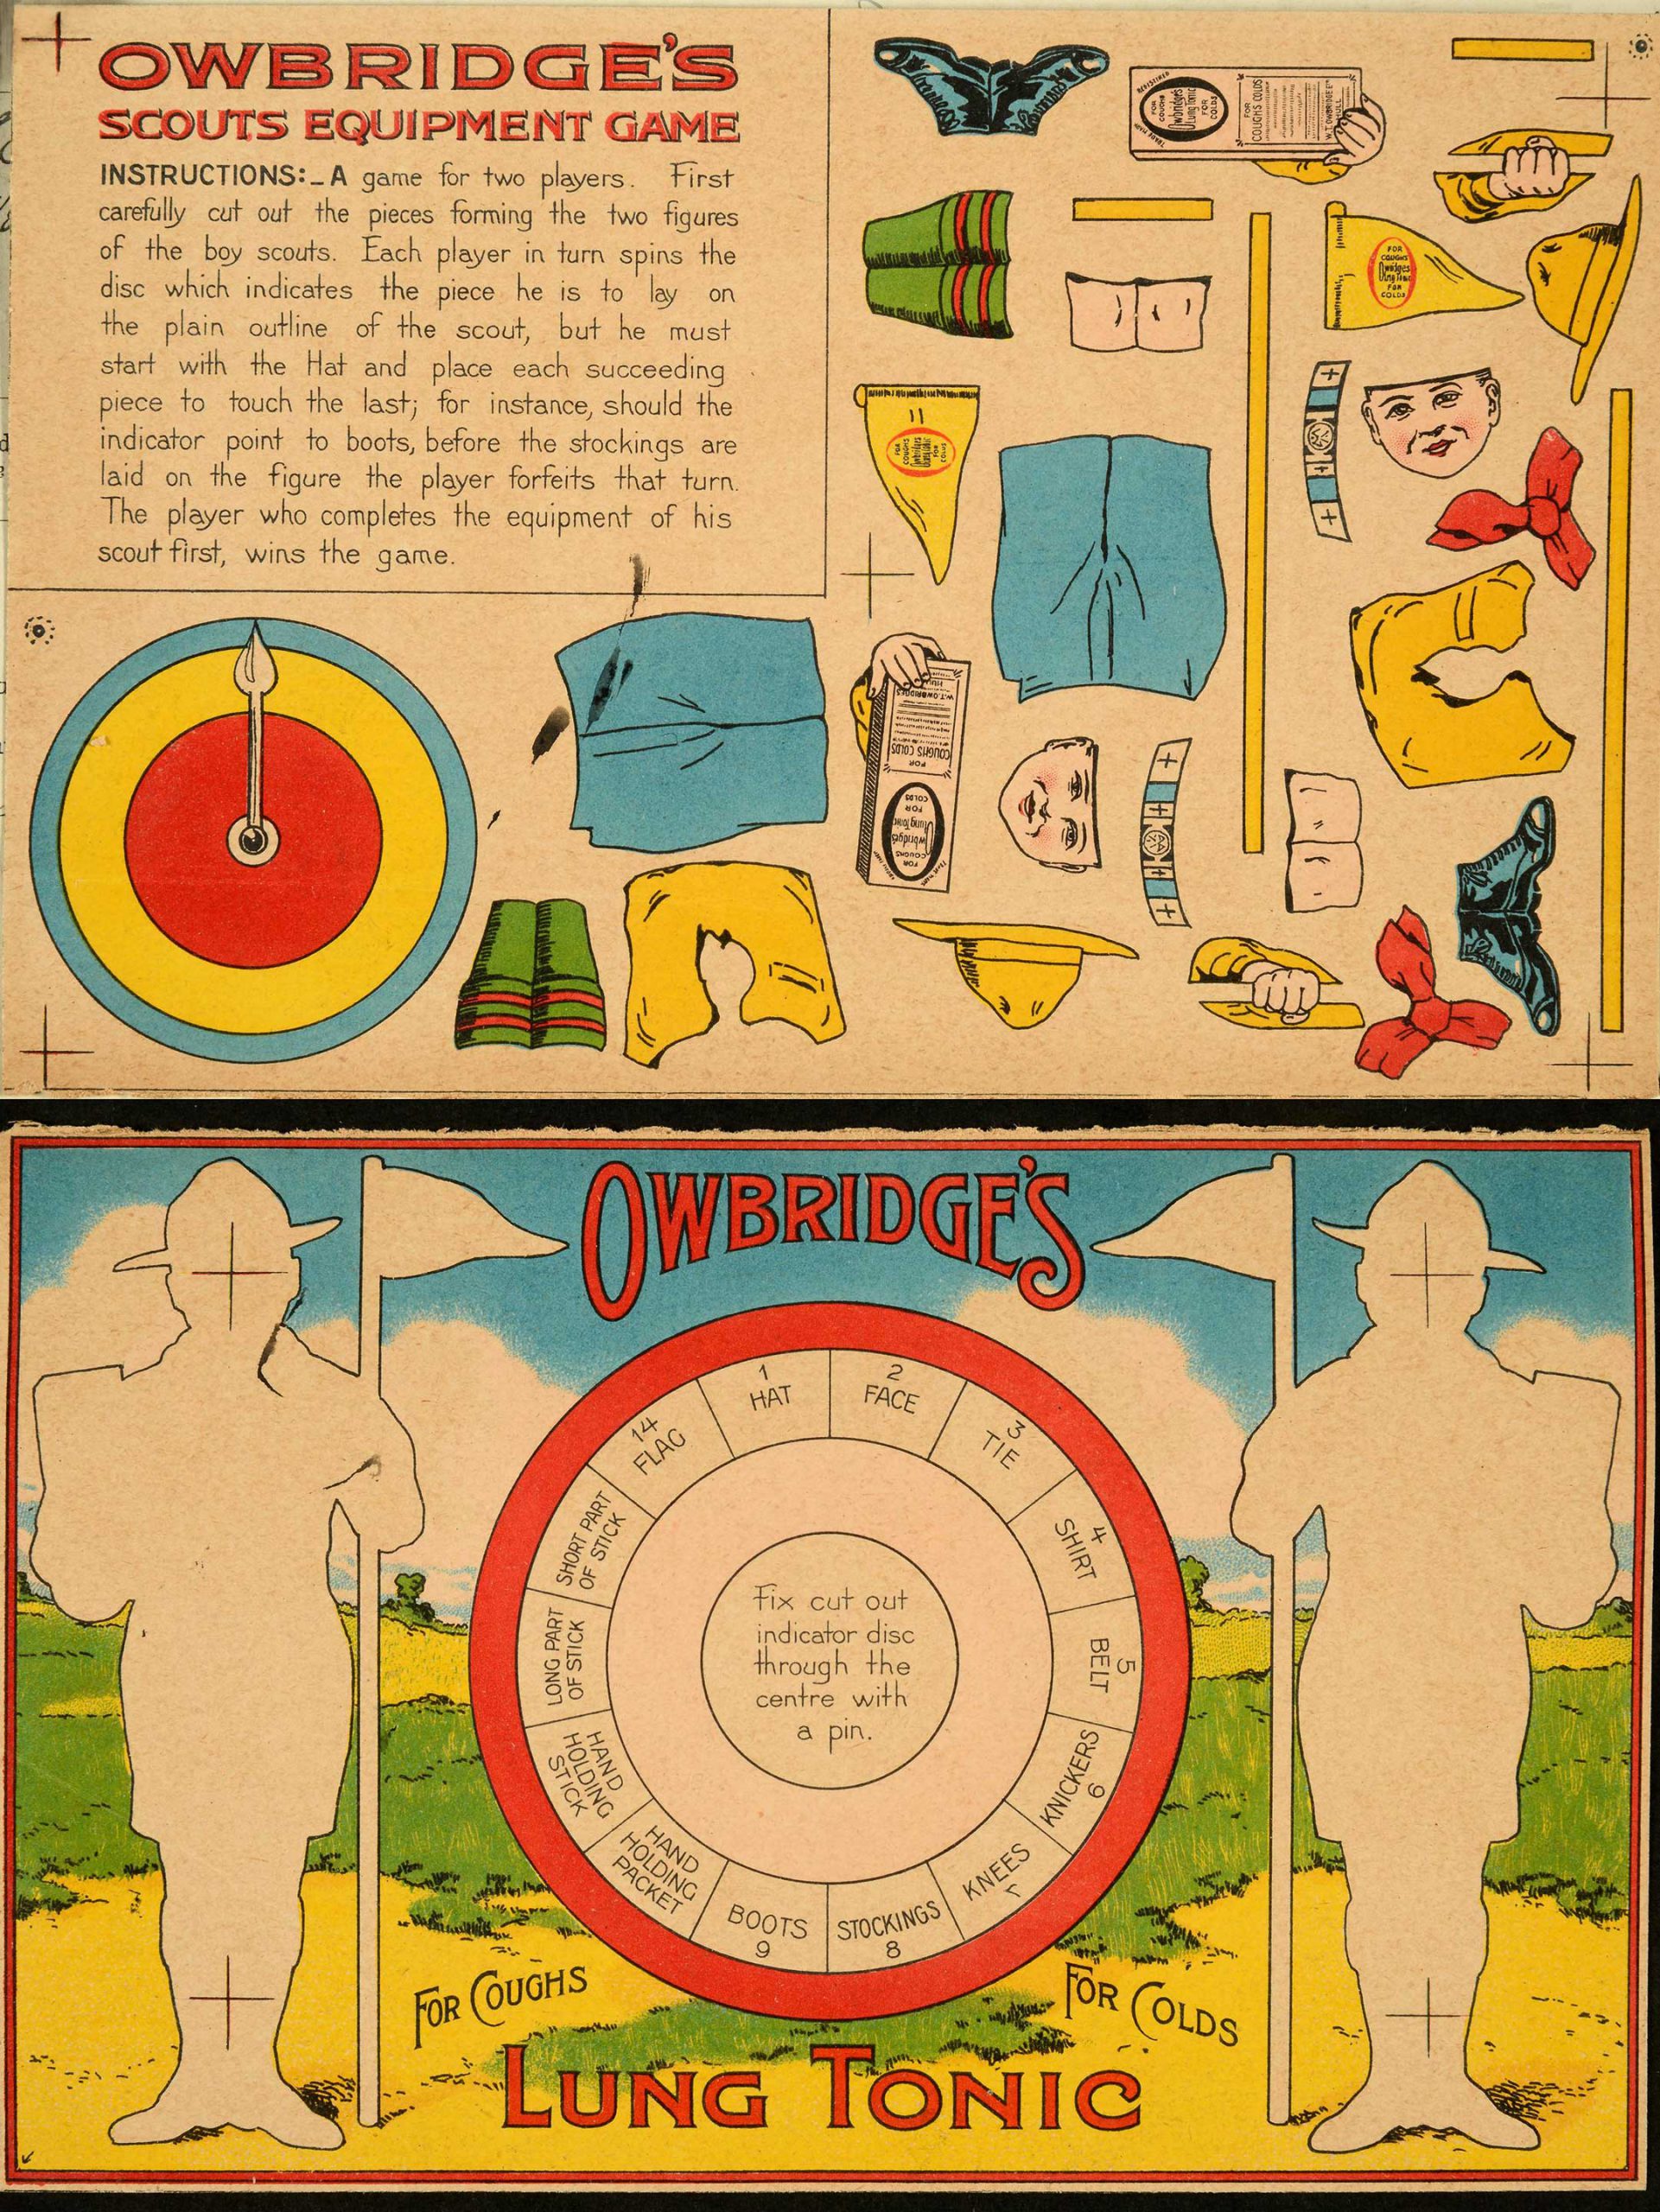 Game in which one half has different faces and clothing that can be cut out, and the second half has a wheel and two empty figures.